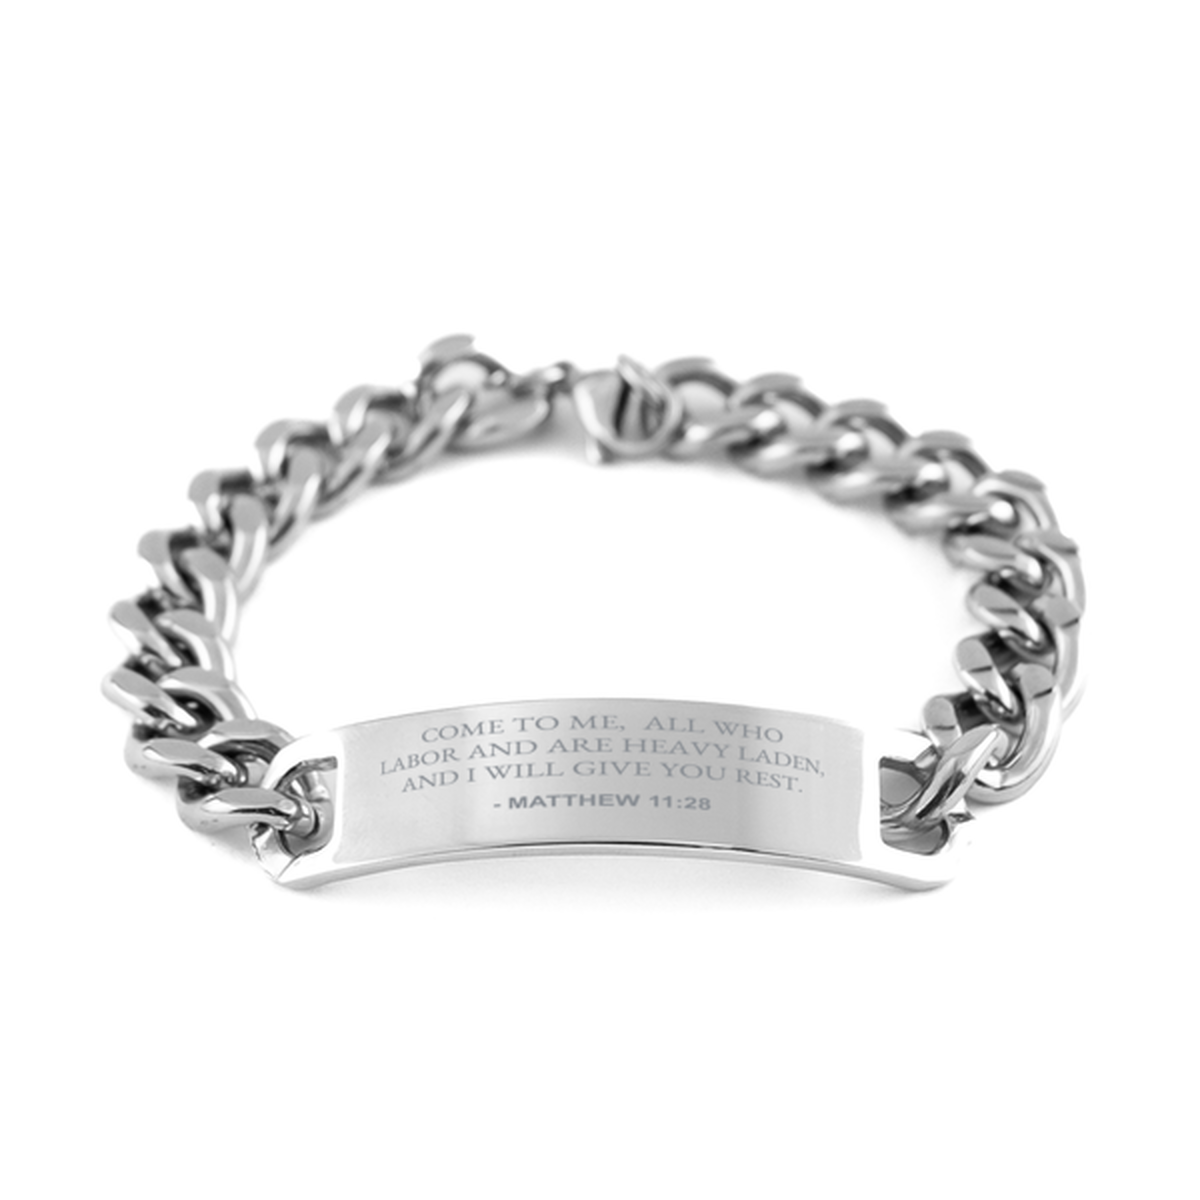 Bible Verse Chain Stainless Steel Bracelet, Matthew 11:28 Come To Me, All Who Labor And Are Heavy Laden, Inspirational Christian Gifts For Men Women